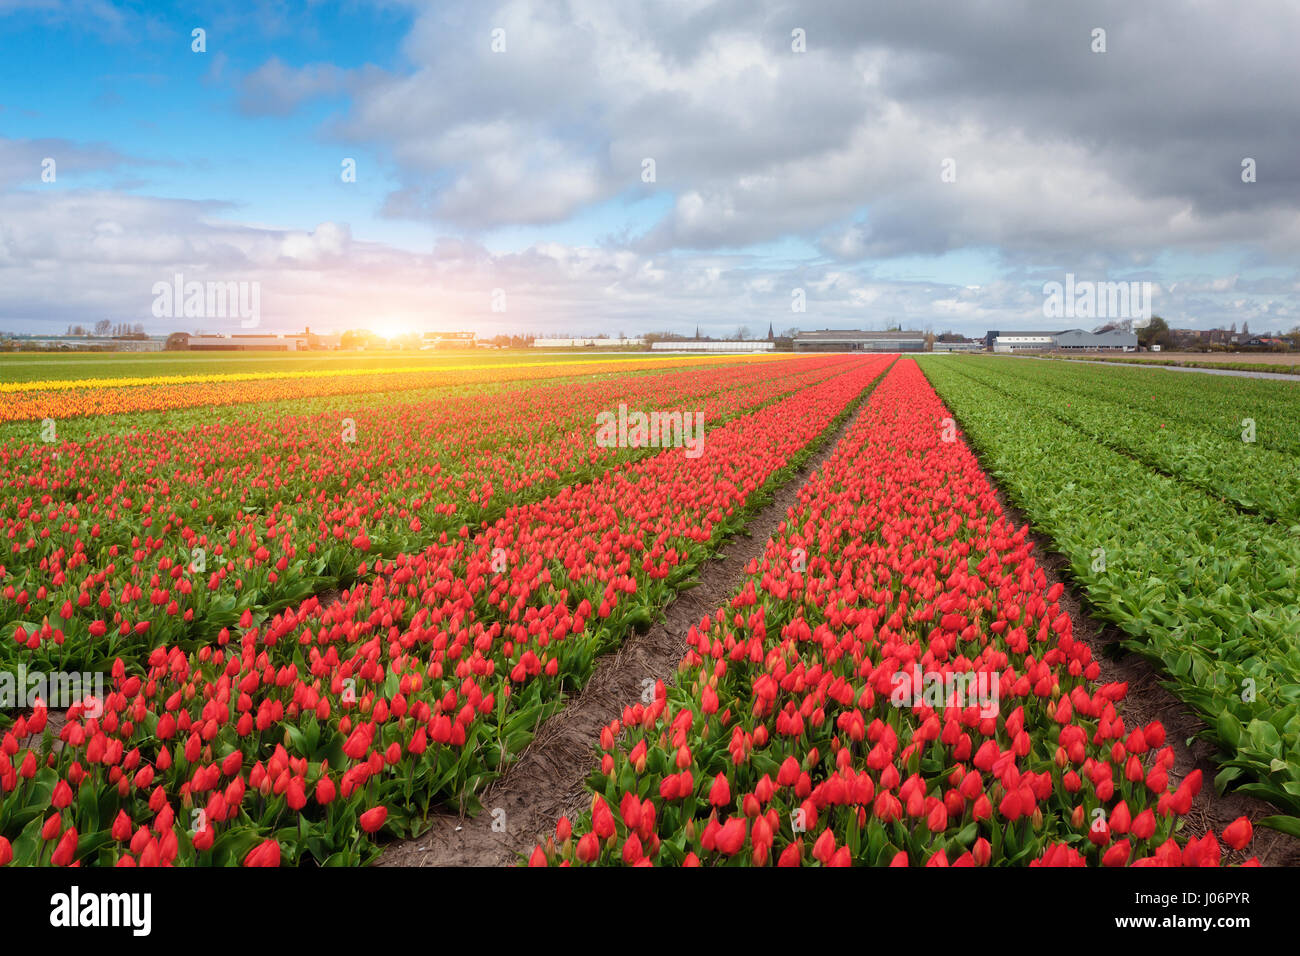 Tulips. Blossom flowers. Rows of blooming red and yellow tulips in an agricultural dutch rural landscape. Spring scene on the tulip farm. Colorful sun Stock Photo